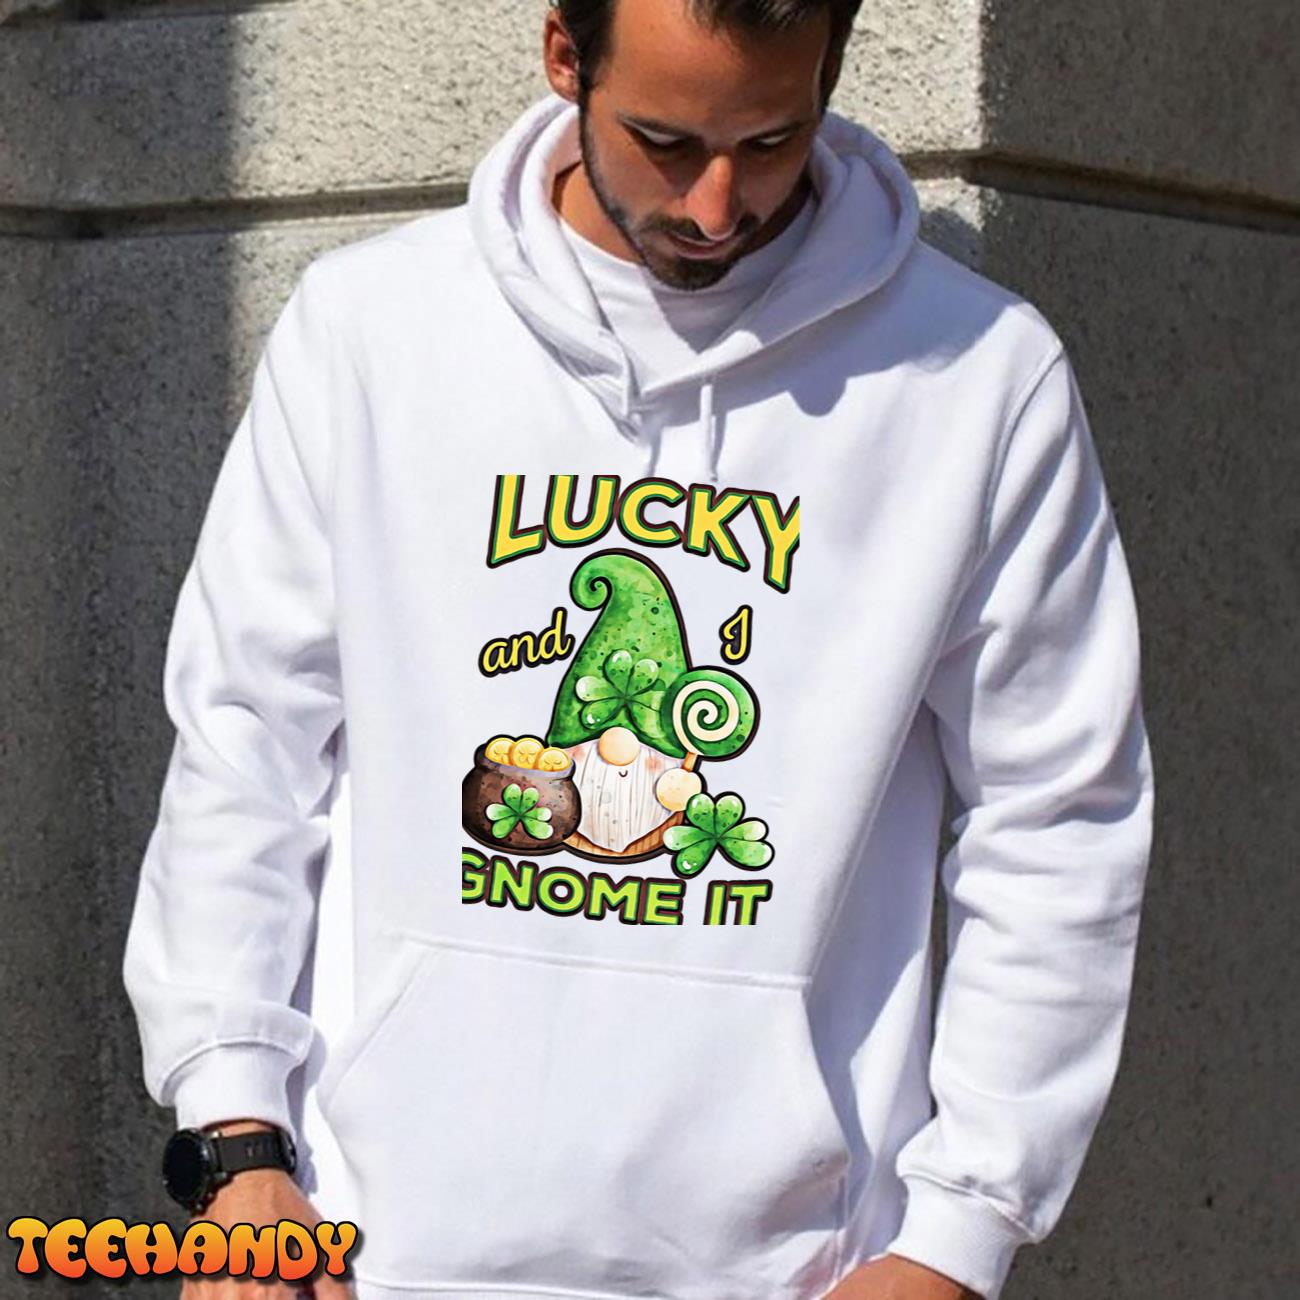 Lucky and I Gnome It Unisex T-Shirt